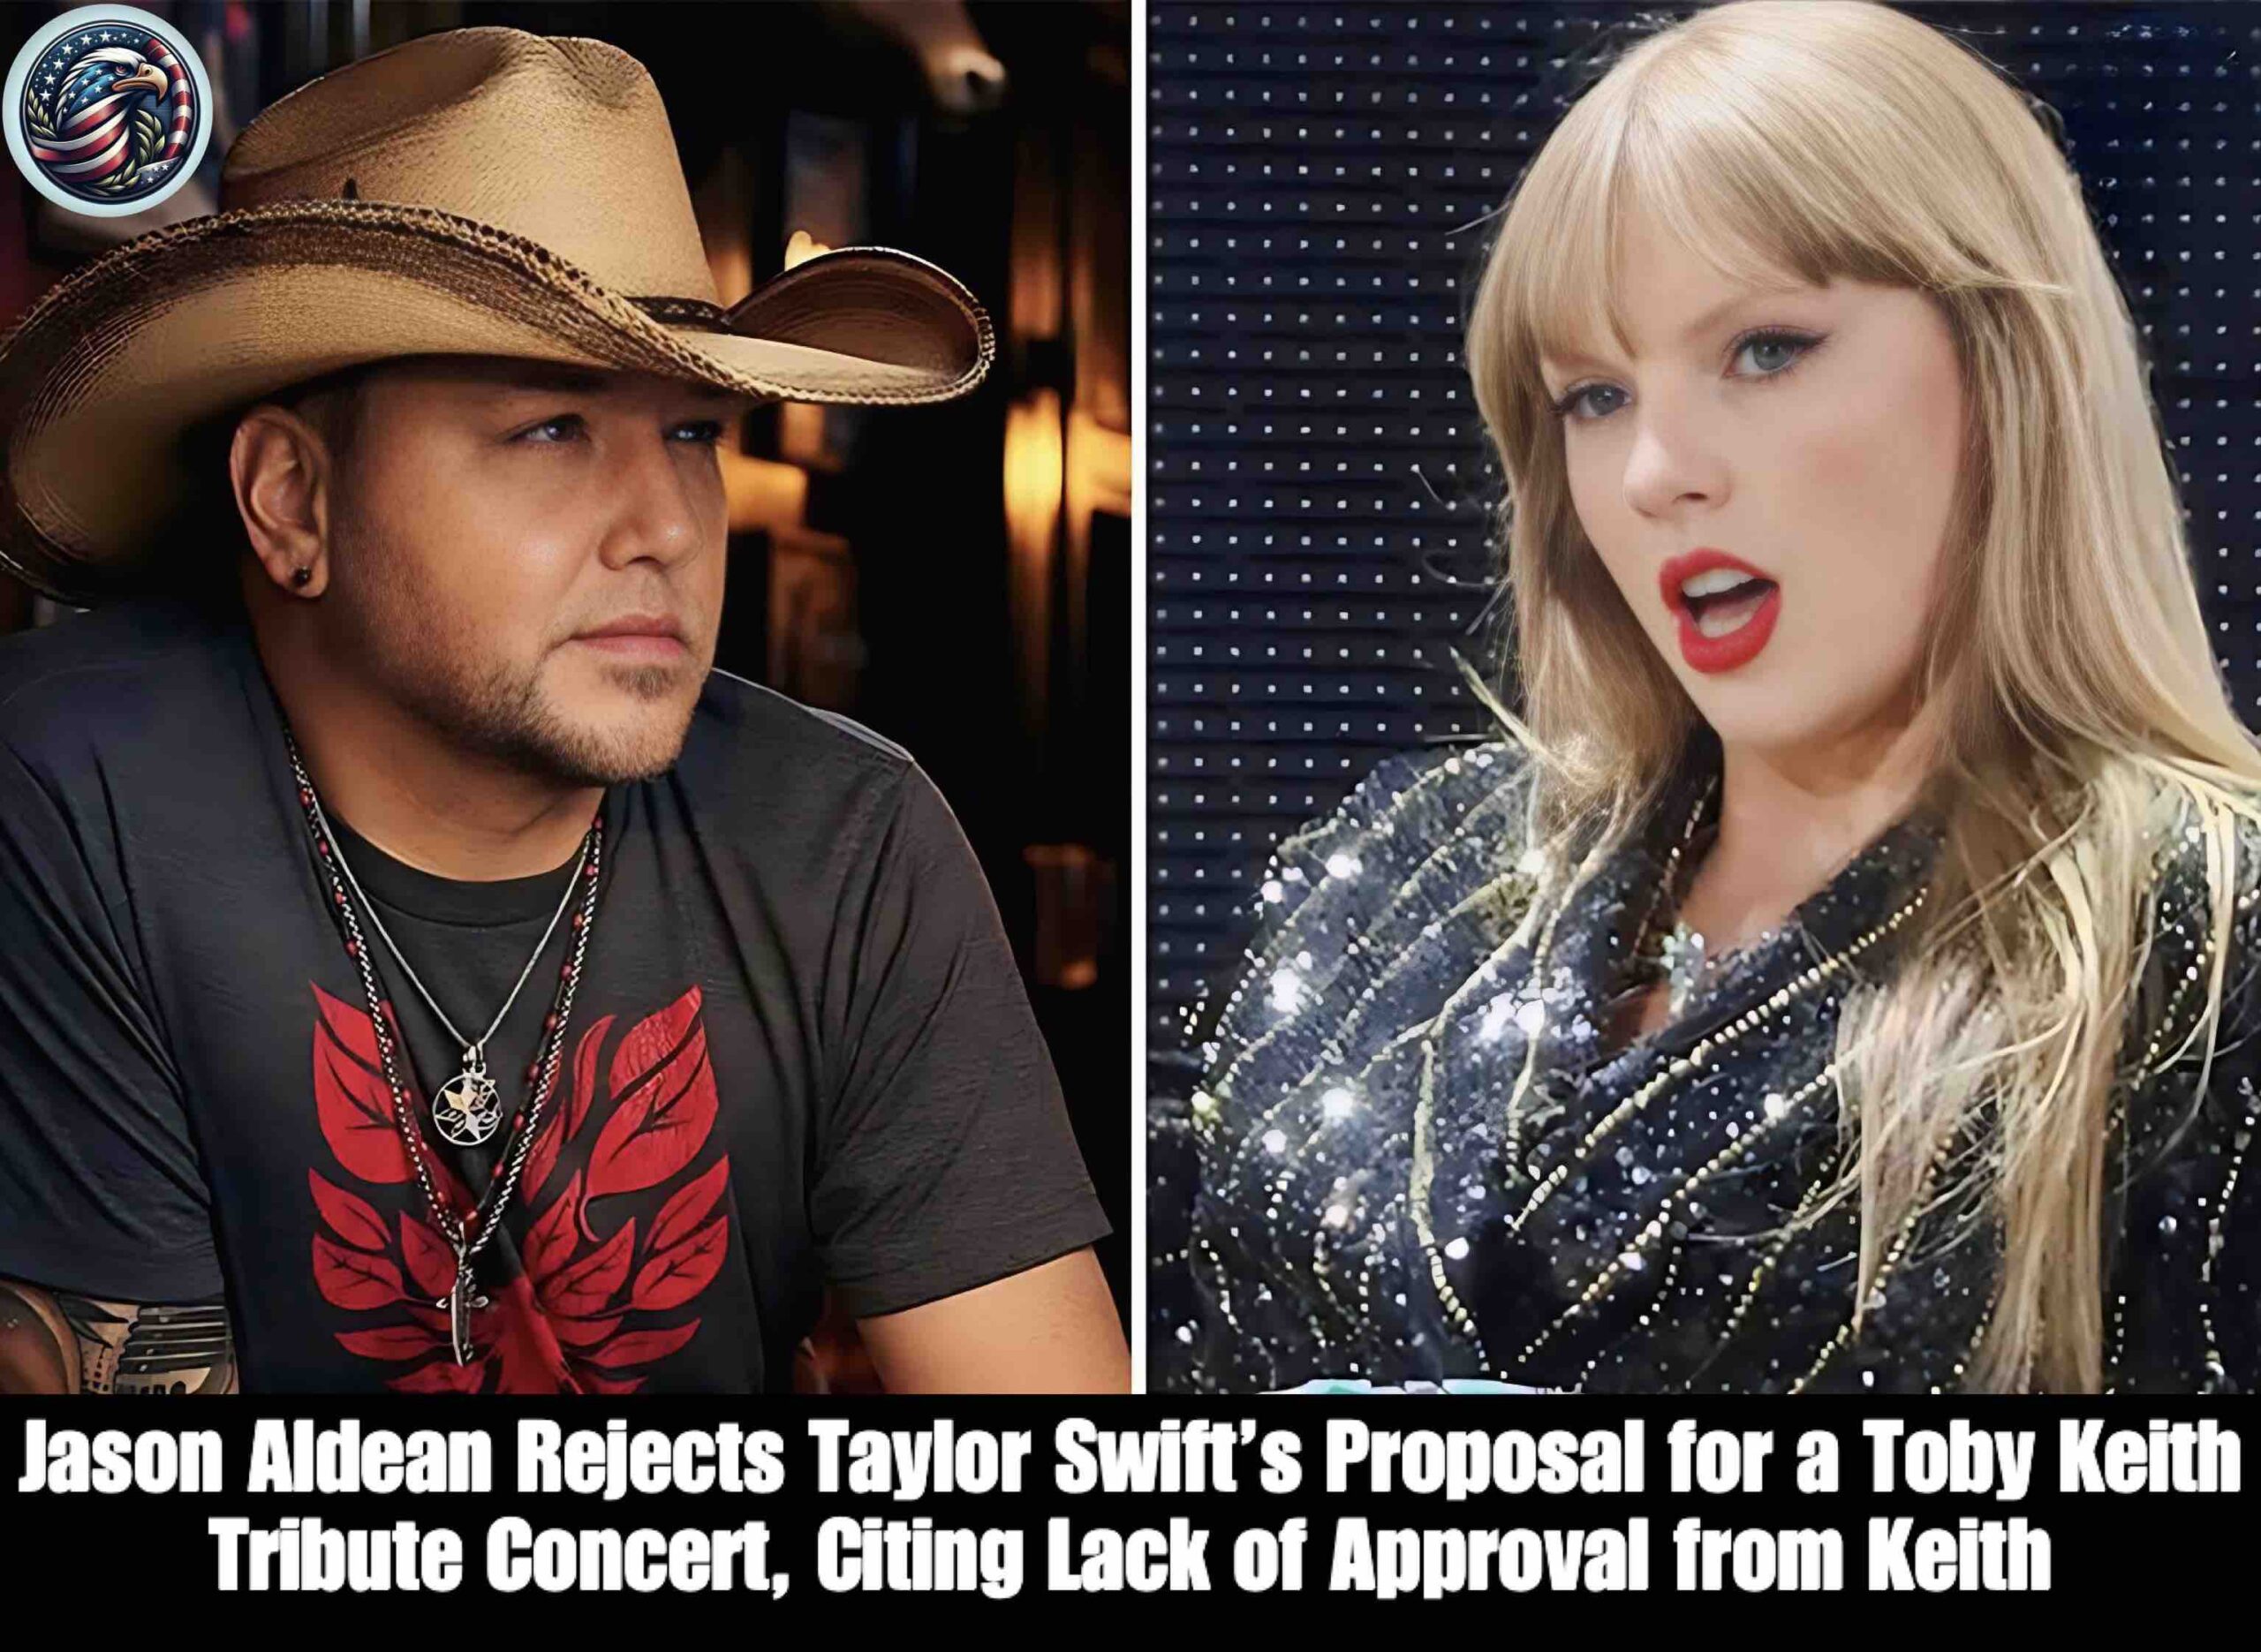 Jason Aldean Rejects Taylor Swift’s Proposal for a Toby Keith Tribute Concert, Citing Lack of Approval from Keith